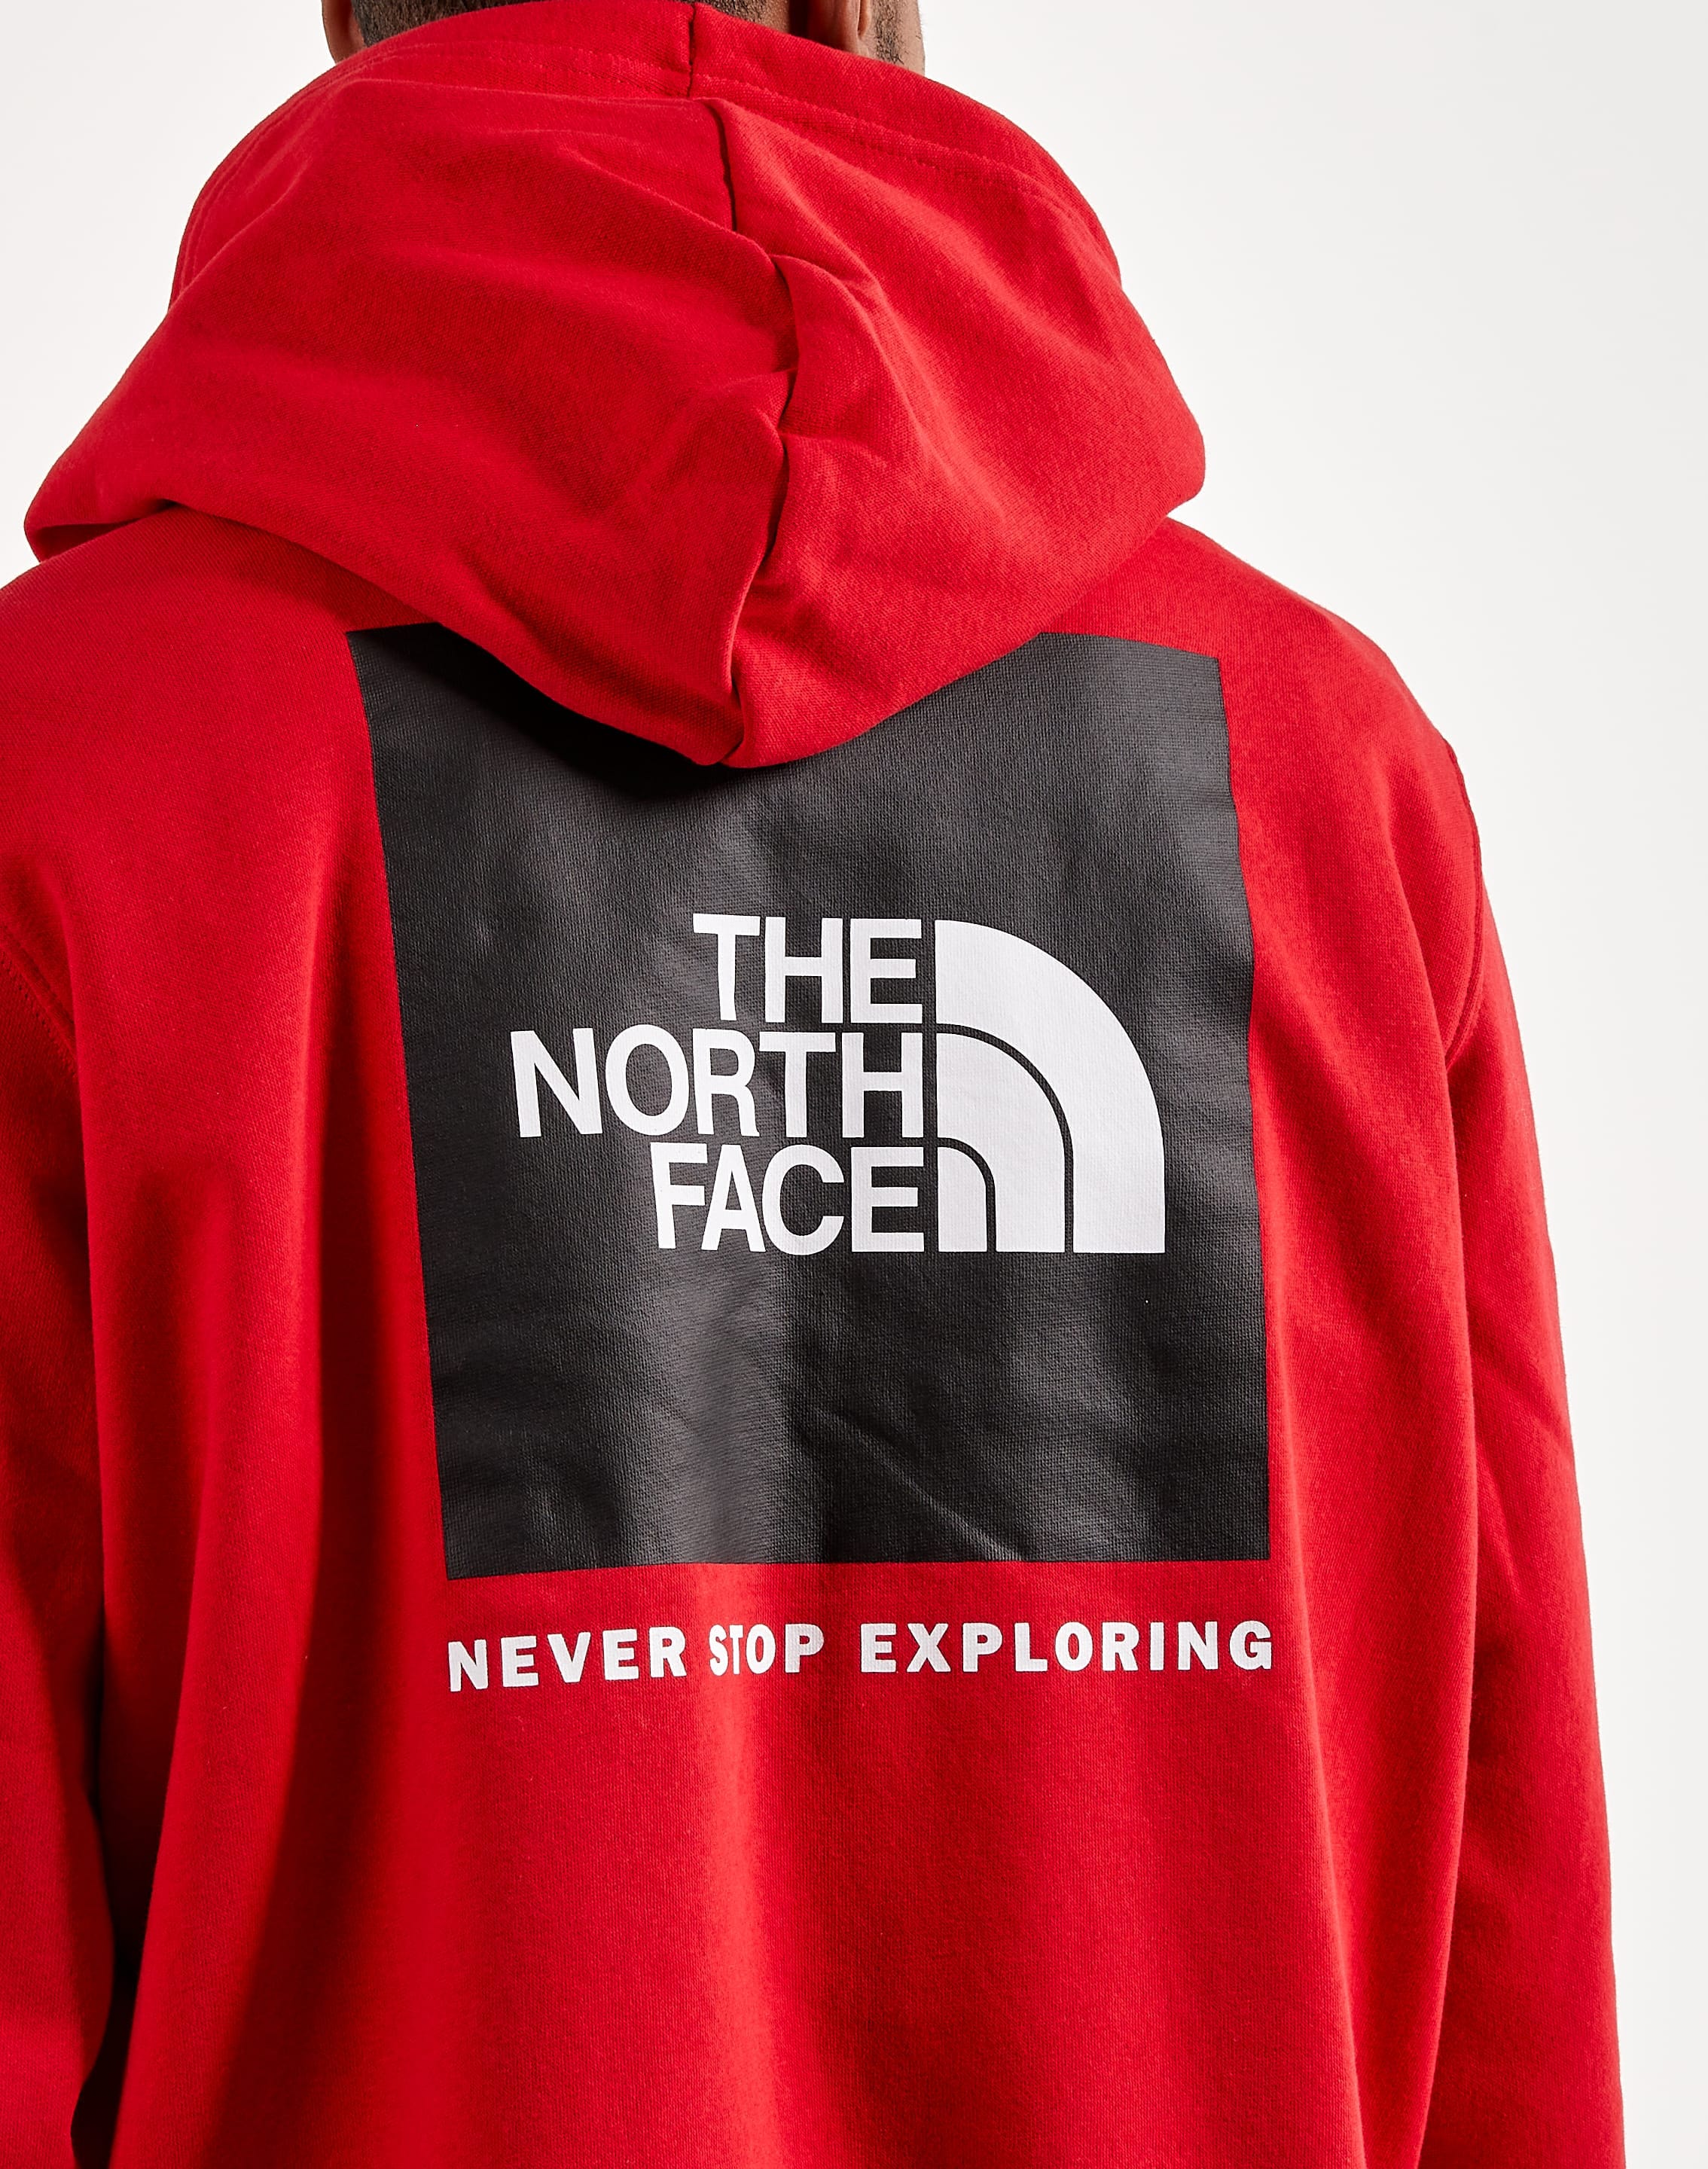 The North Face Never Stop Exploring Pullover Hoodie